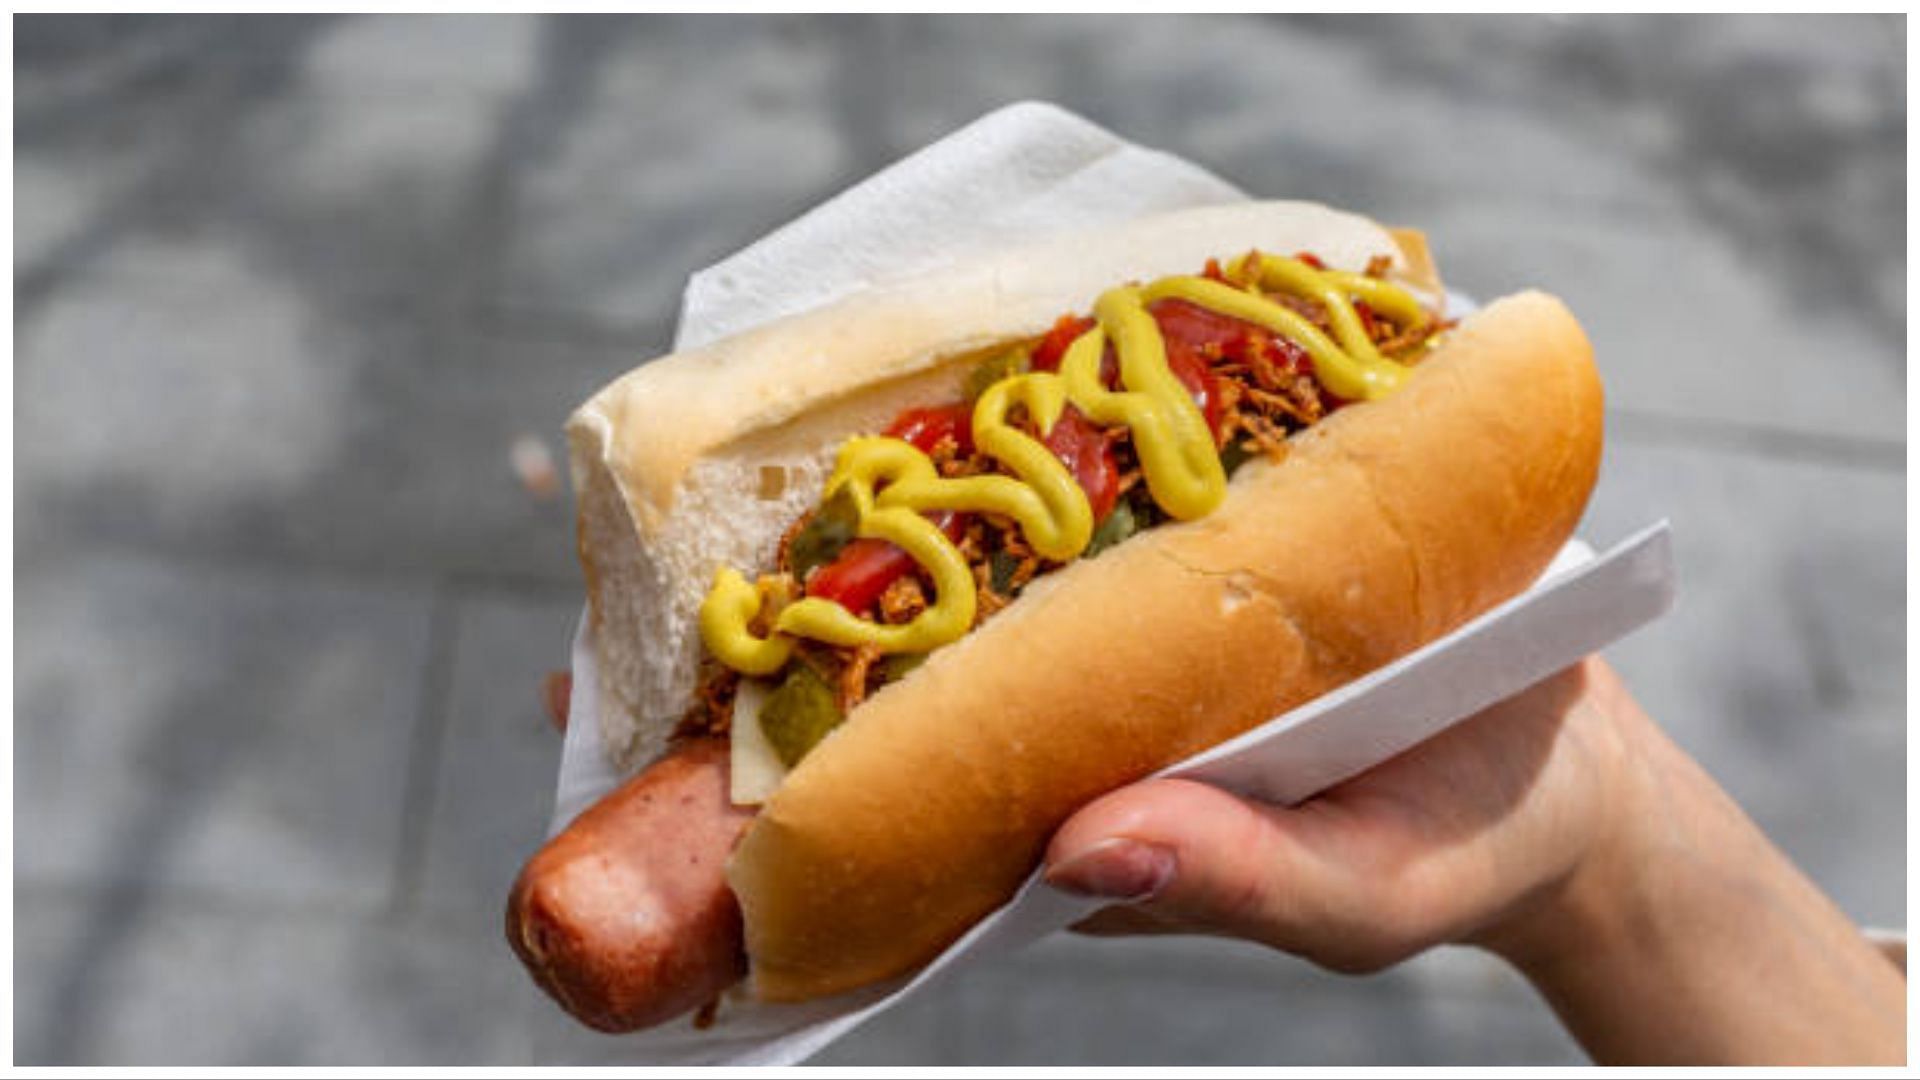 Hot Dog is a very famous fast food item (Image via Getty Images)